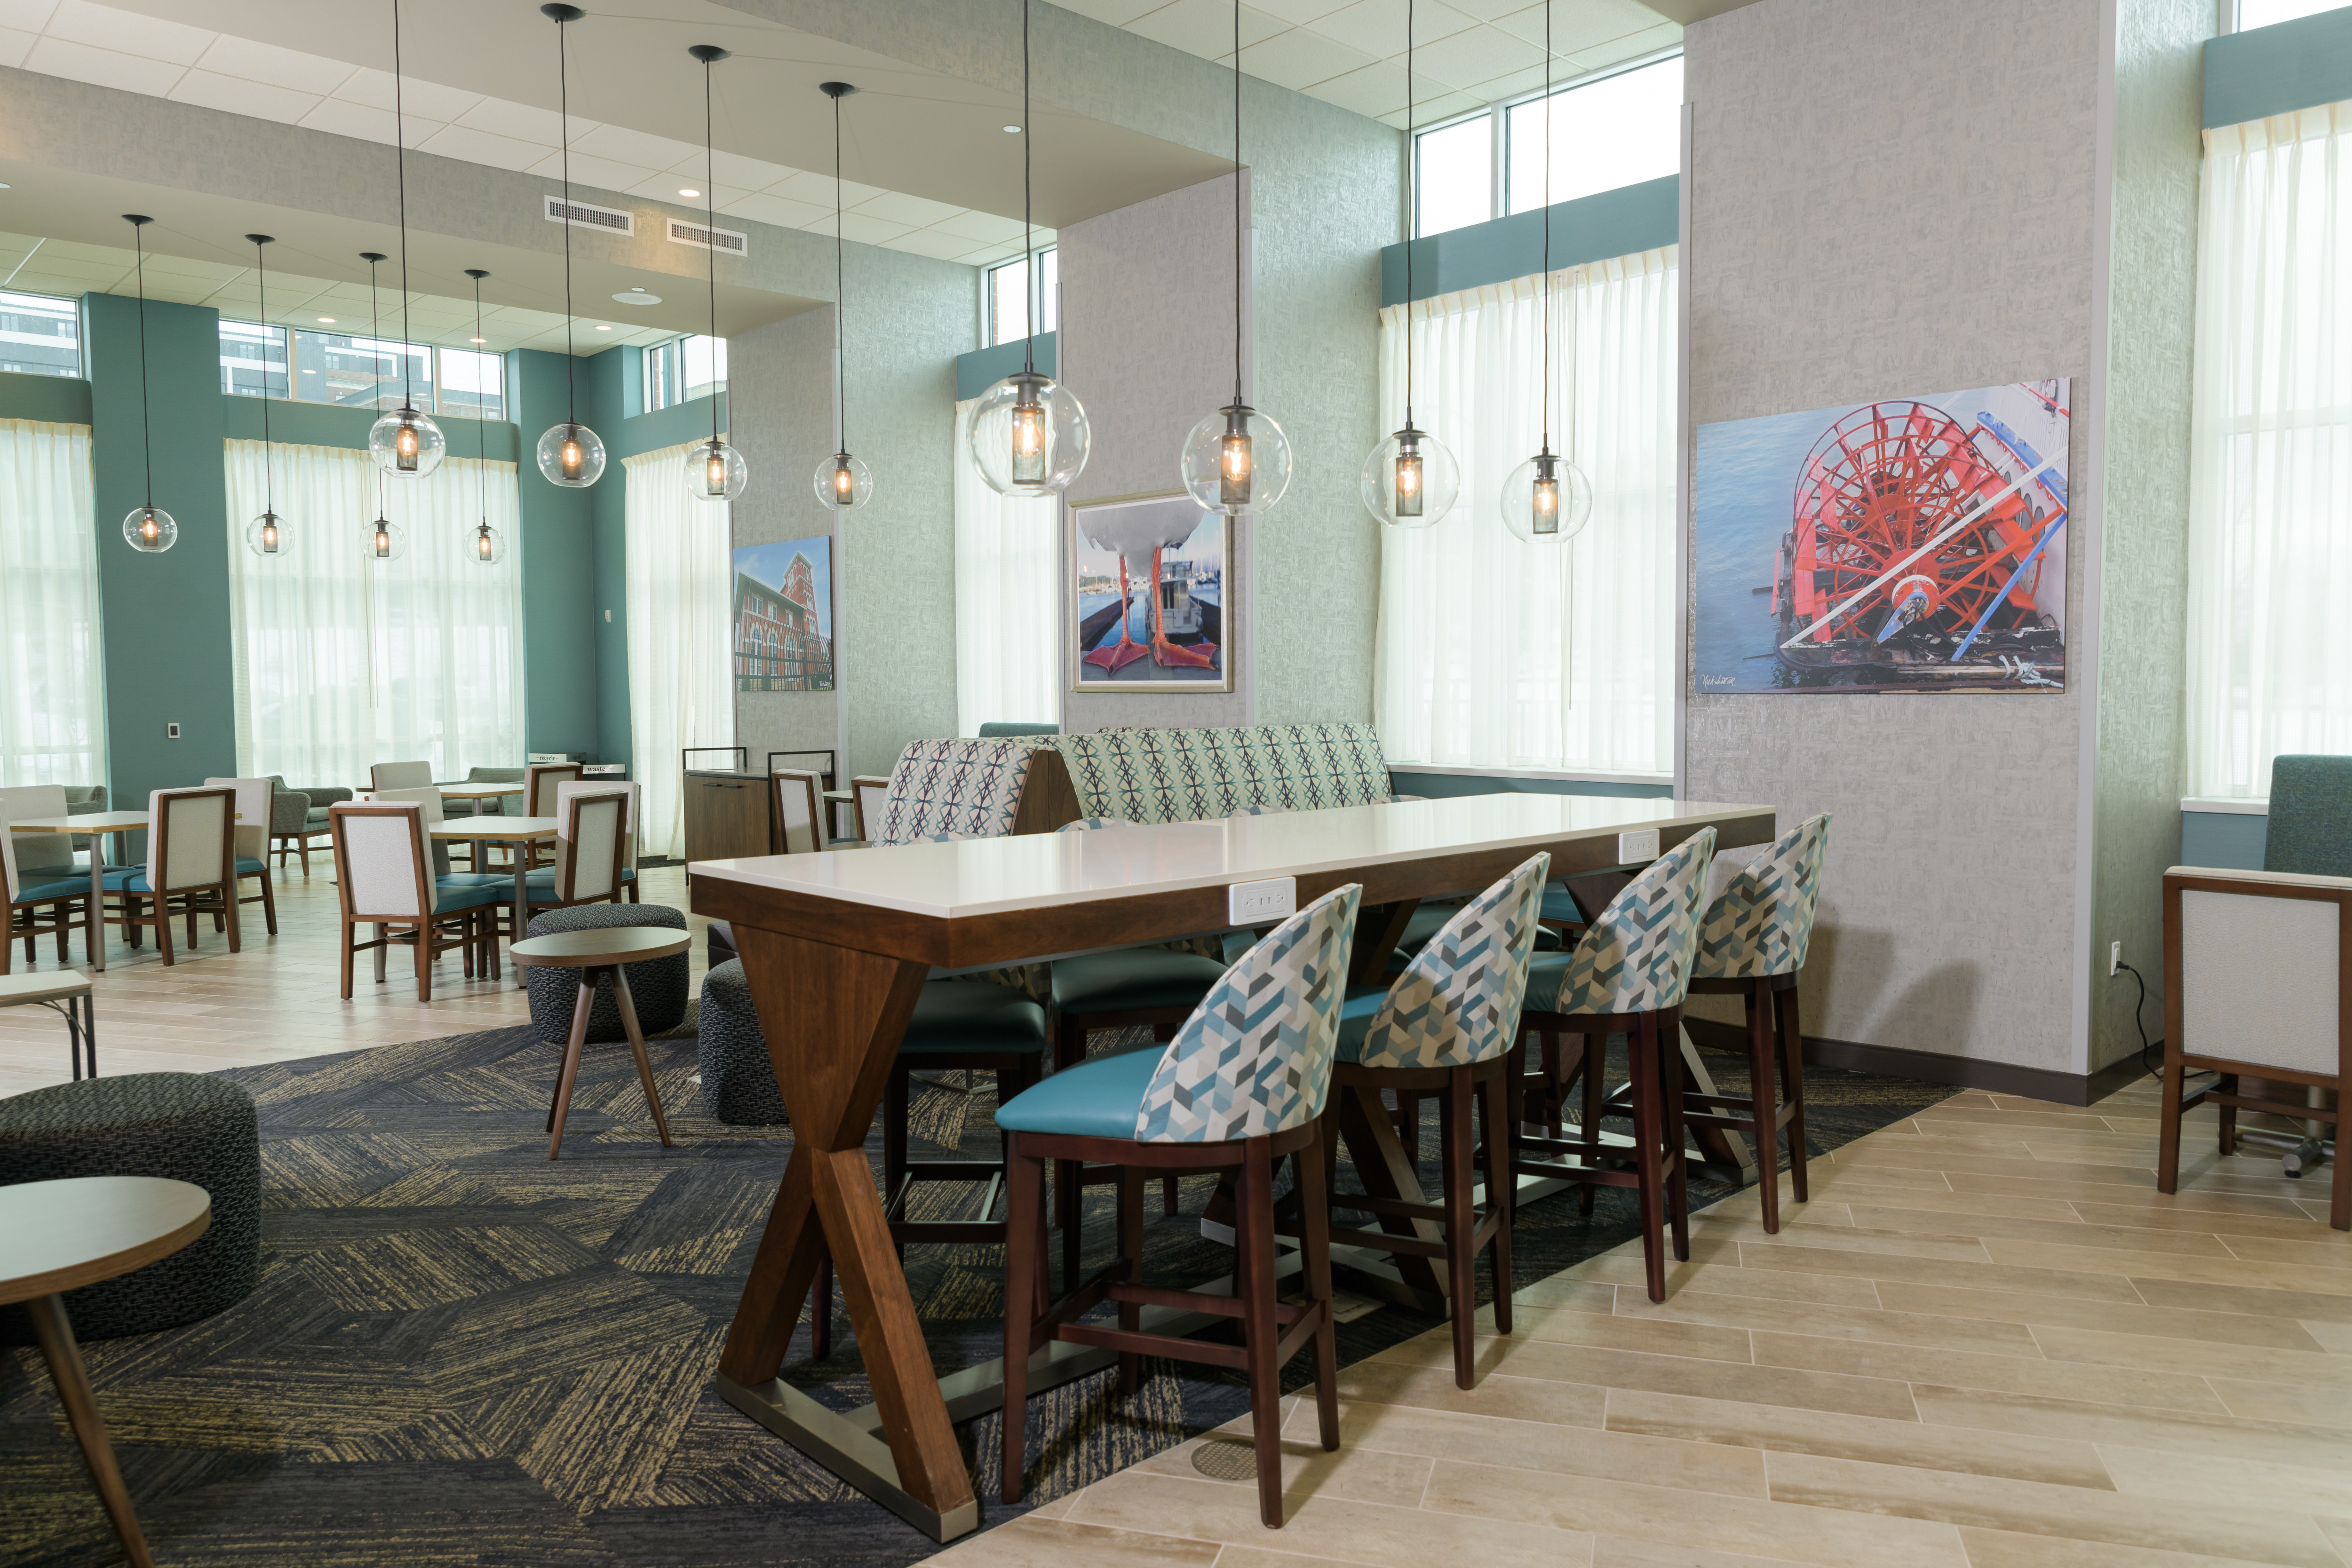 Lobby seating area with table and stools